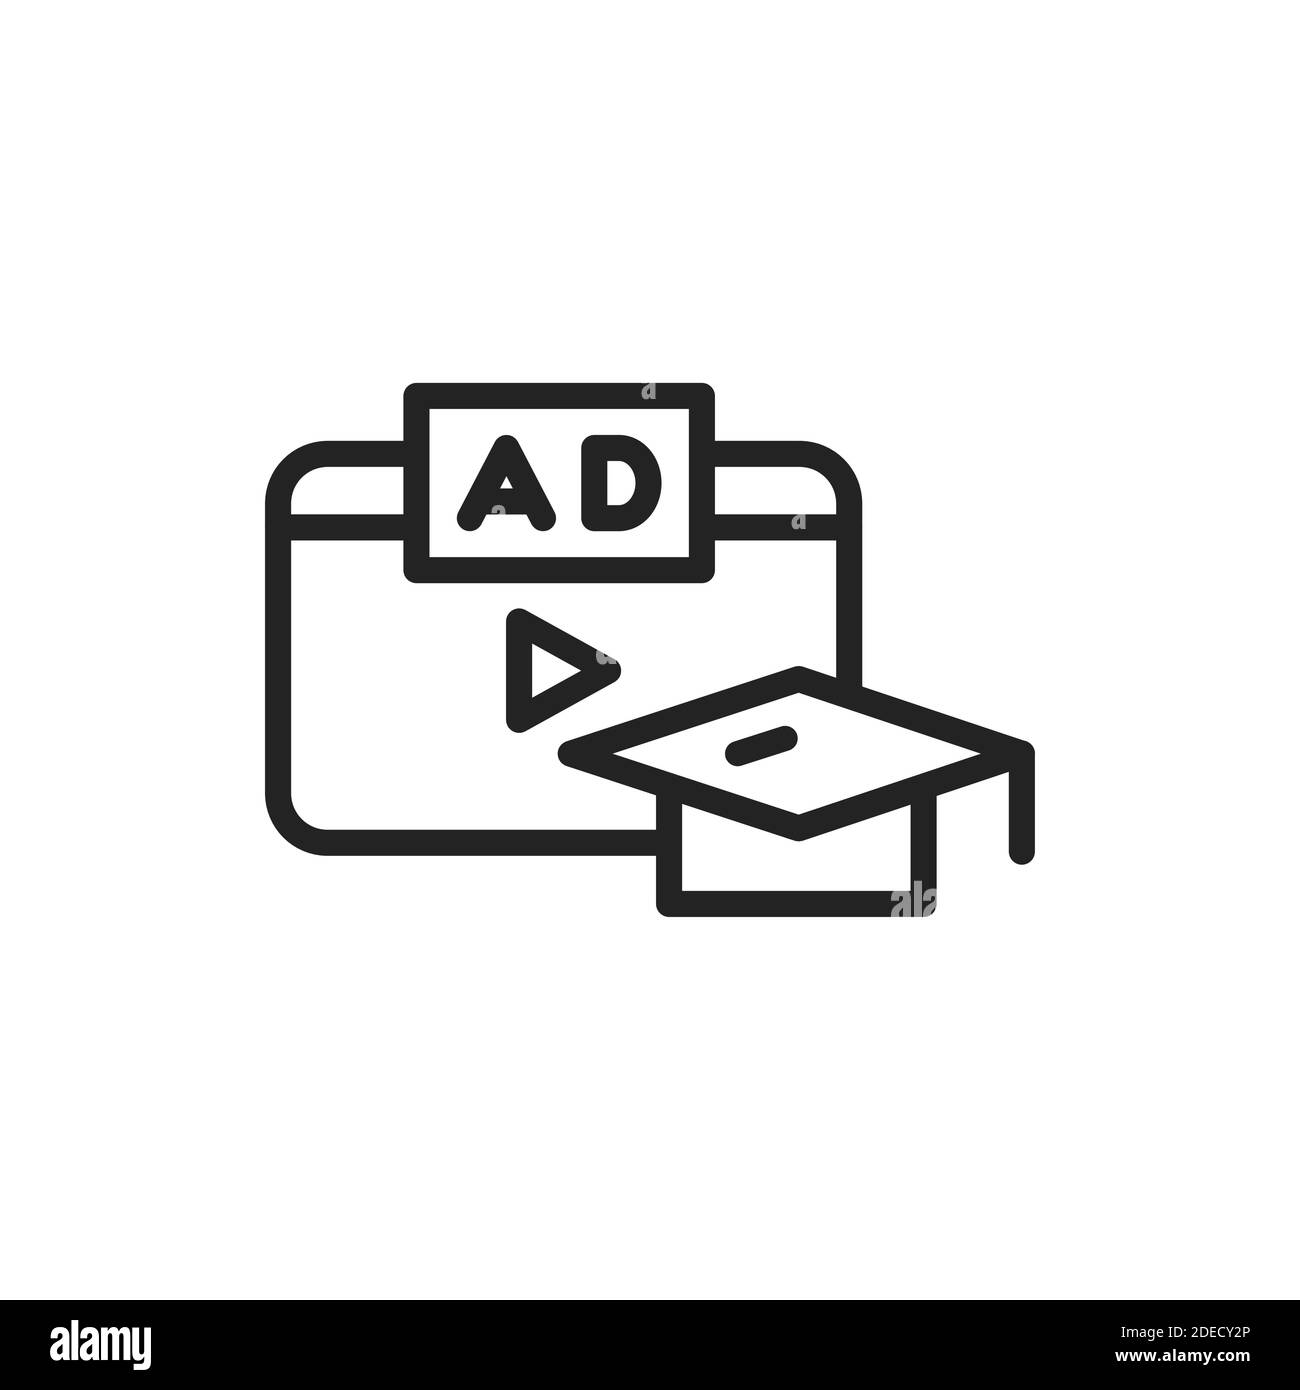 Marketing and advertising courses black line icon. Vector illustration. Outline pictogram for web page, mobile app, promo Stock Vector